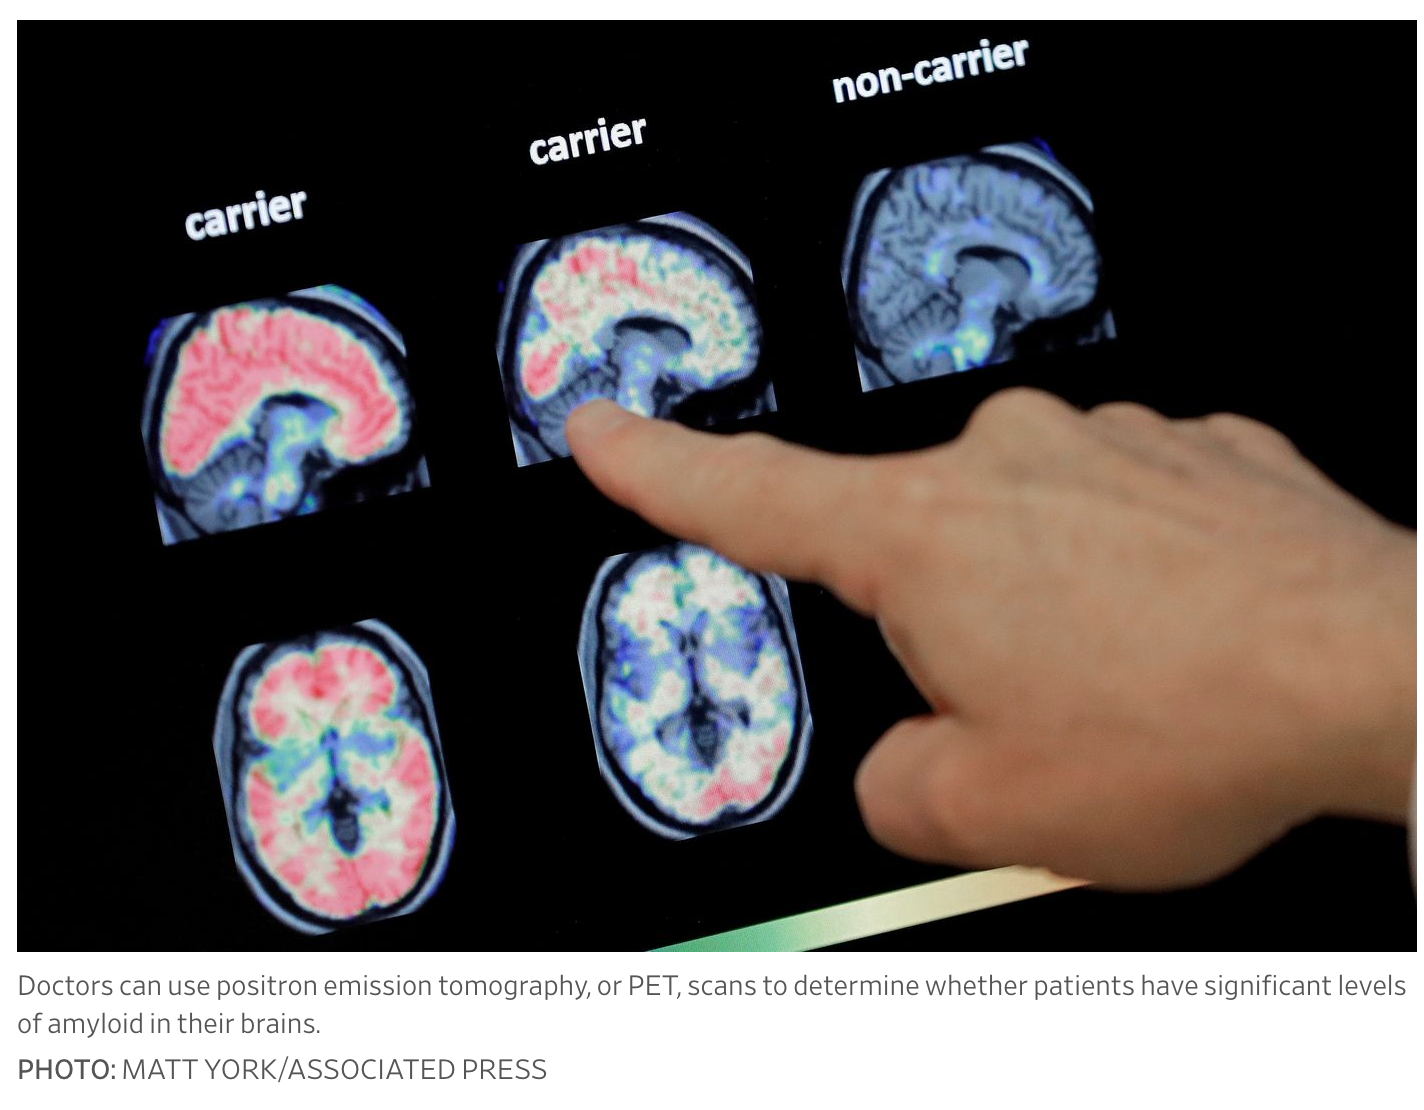 Should You Find Out If You’re At Risk of Alzheimer’s?